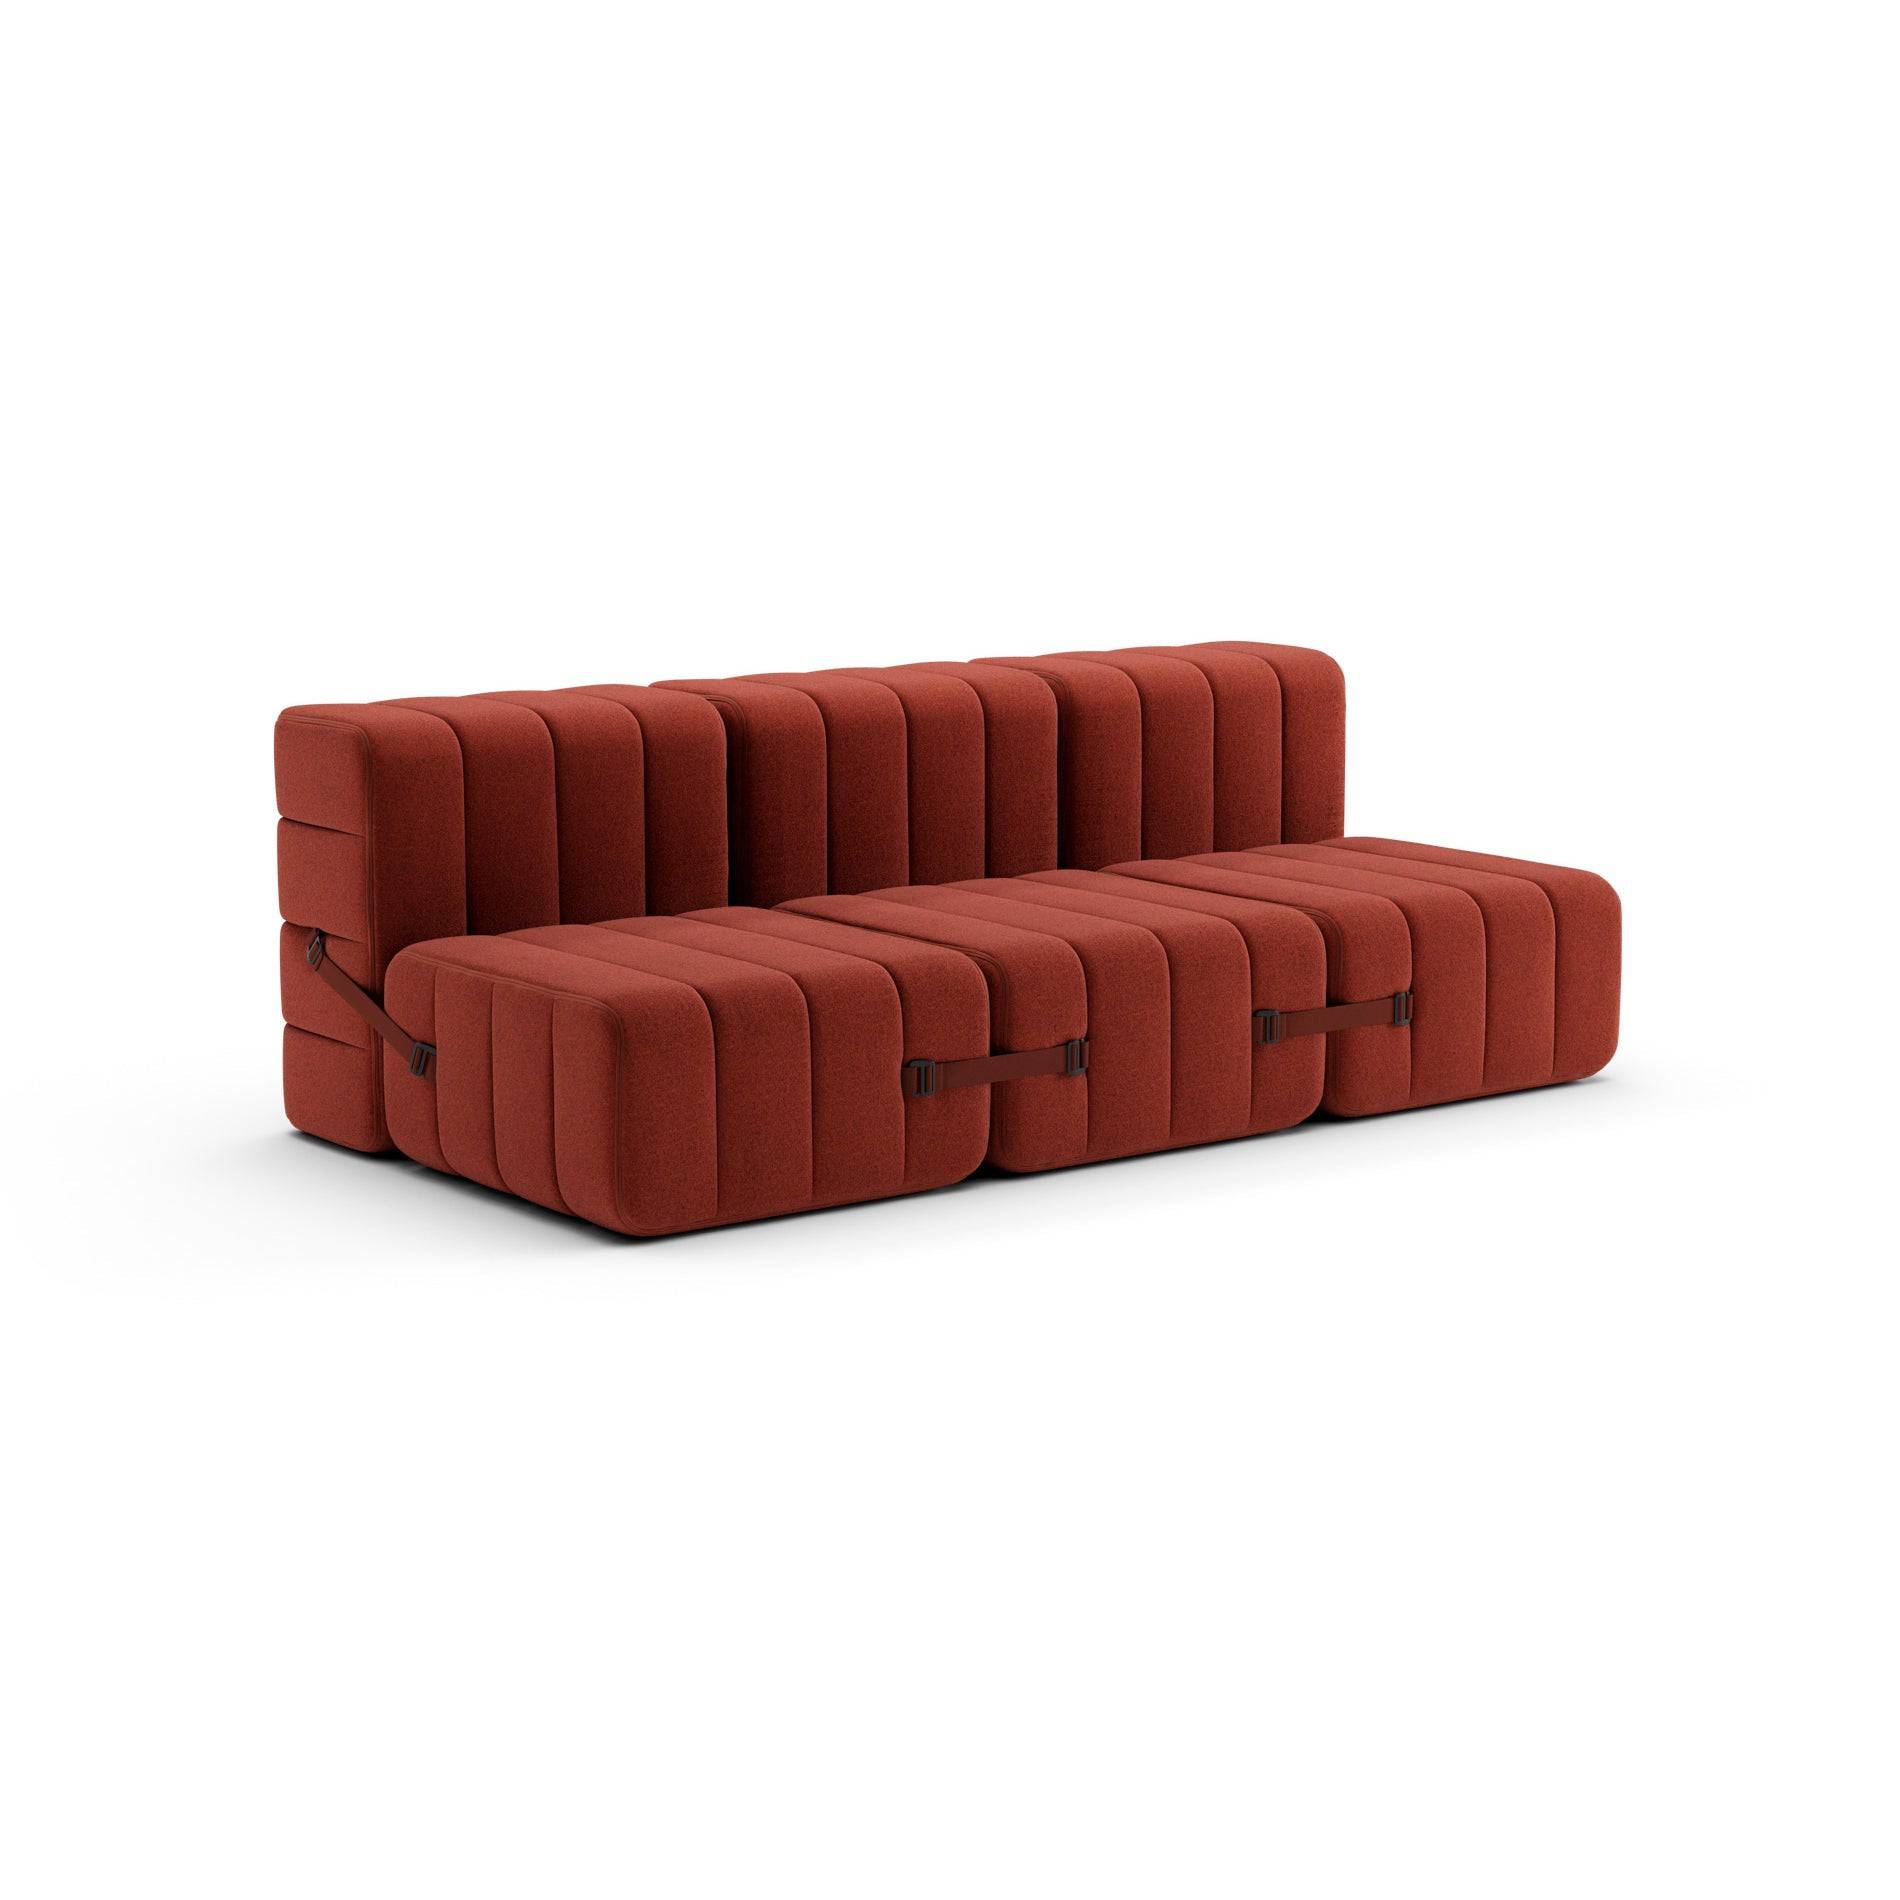 Curt Sofa System - Red - THAT COOL LIVING